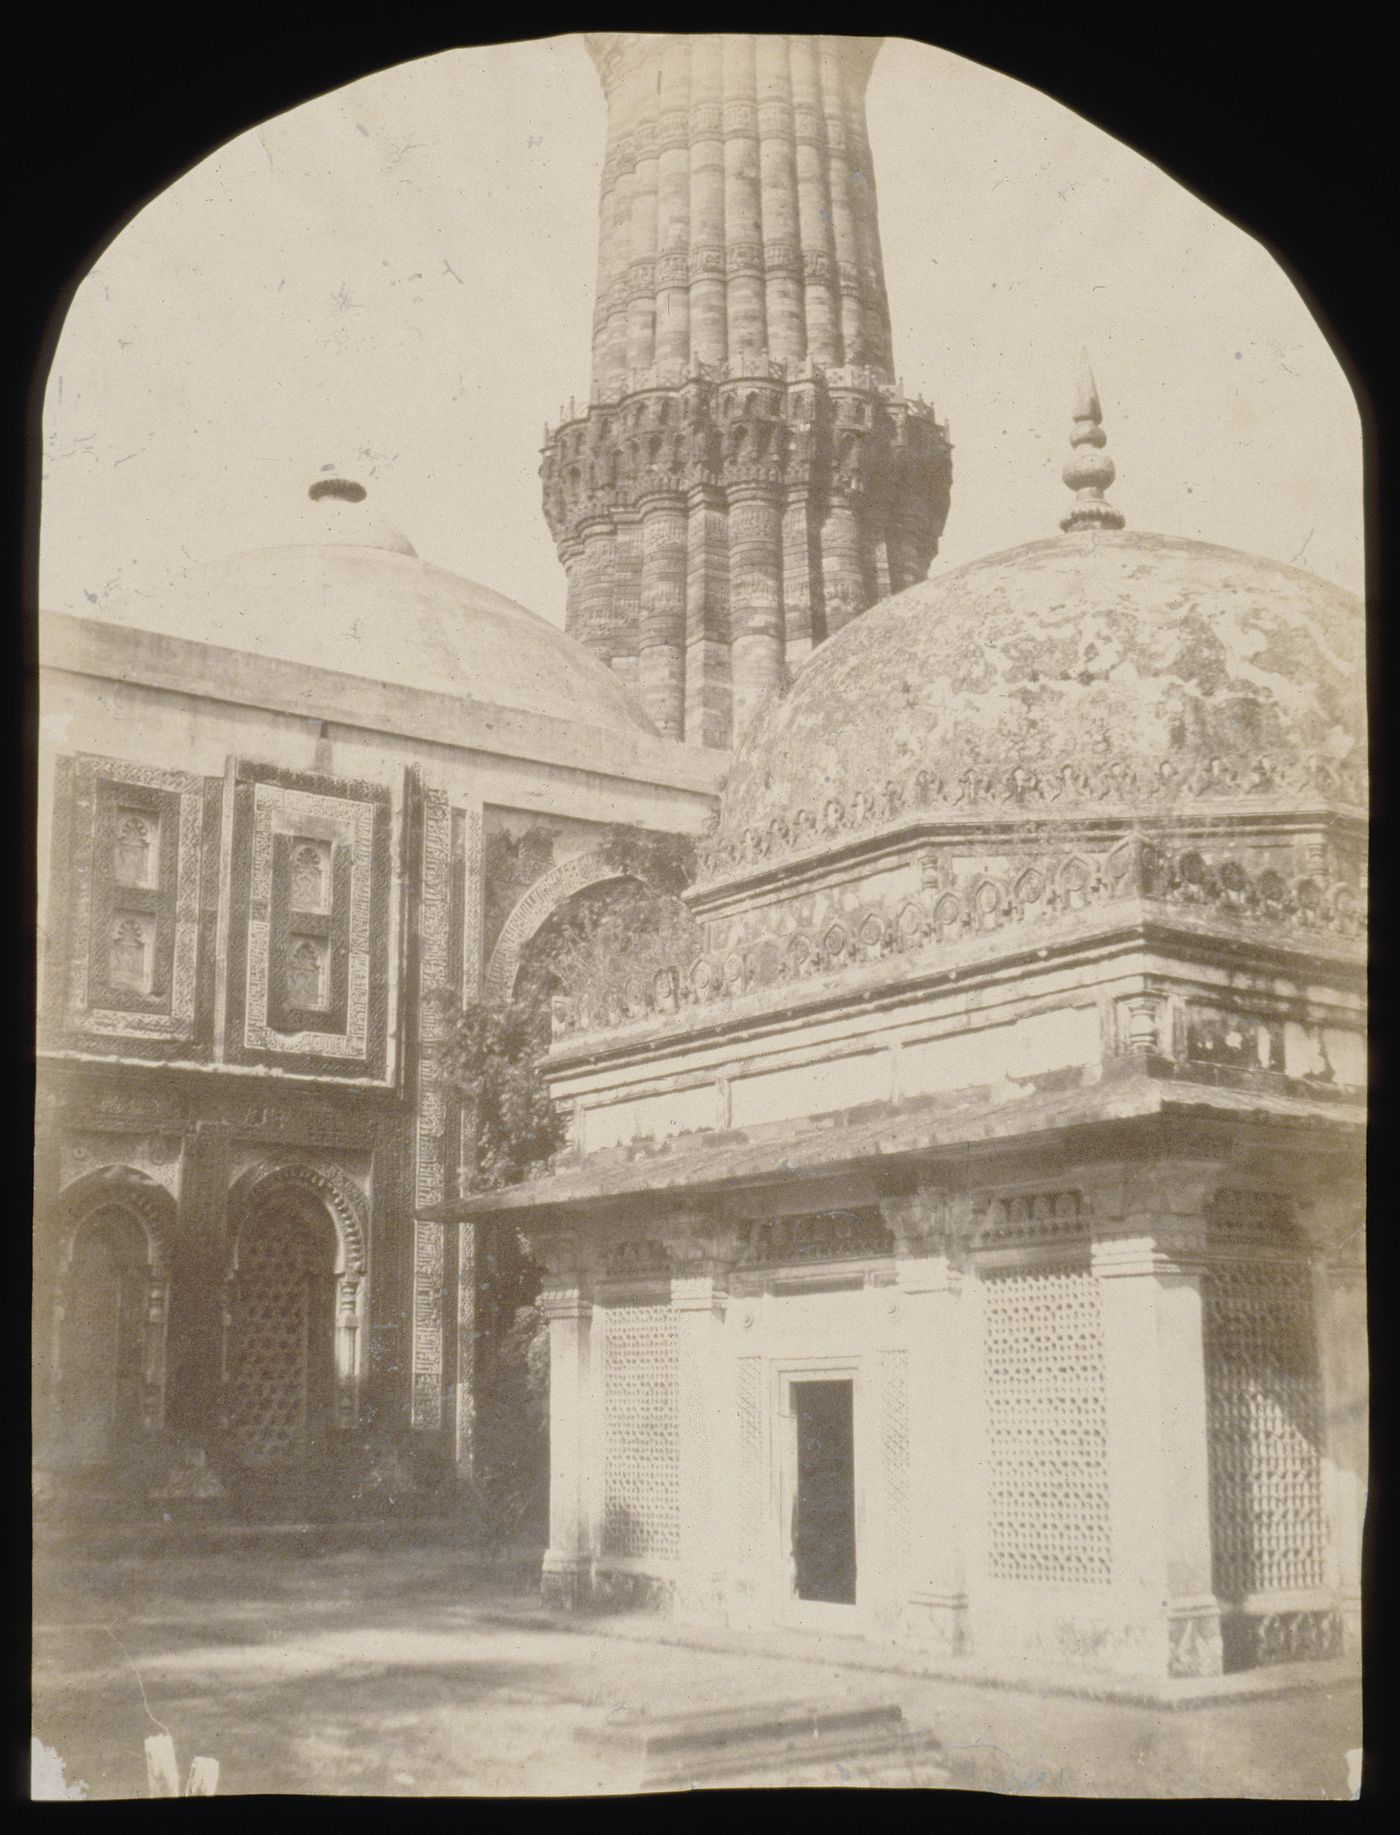 View of Iman Zamin's Tomb with the 'Ala'i Darvaza [Lofty Gate] and the Qutb Minar in the background, Quwwat al-Islam [Might of Islam] Mosque Complex, Delhi, India